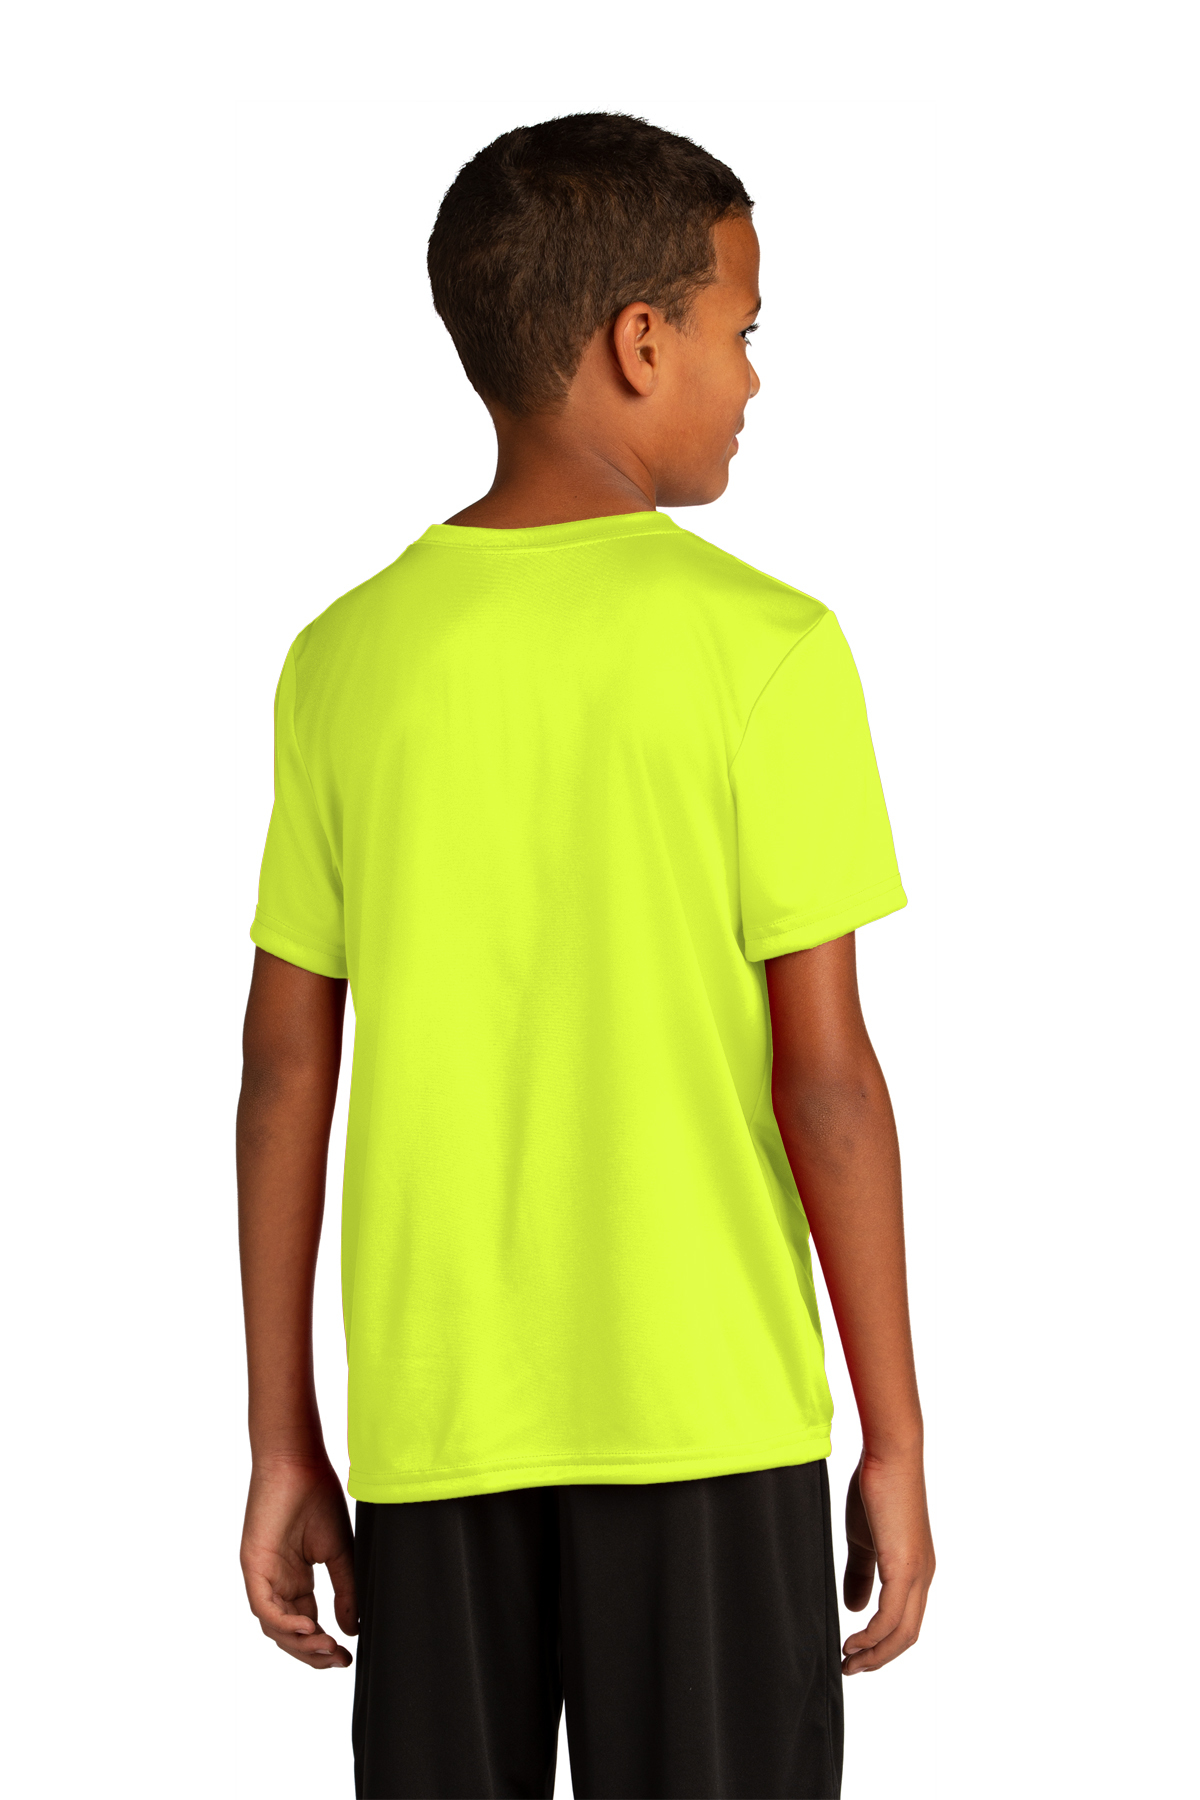 PosiCharge Sport-Tek SanMar | Tee | Re-Compete Youth Product